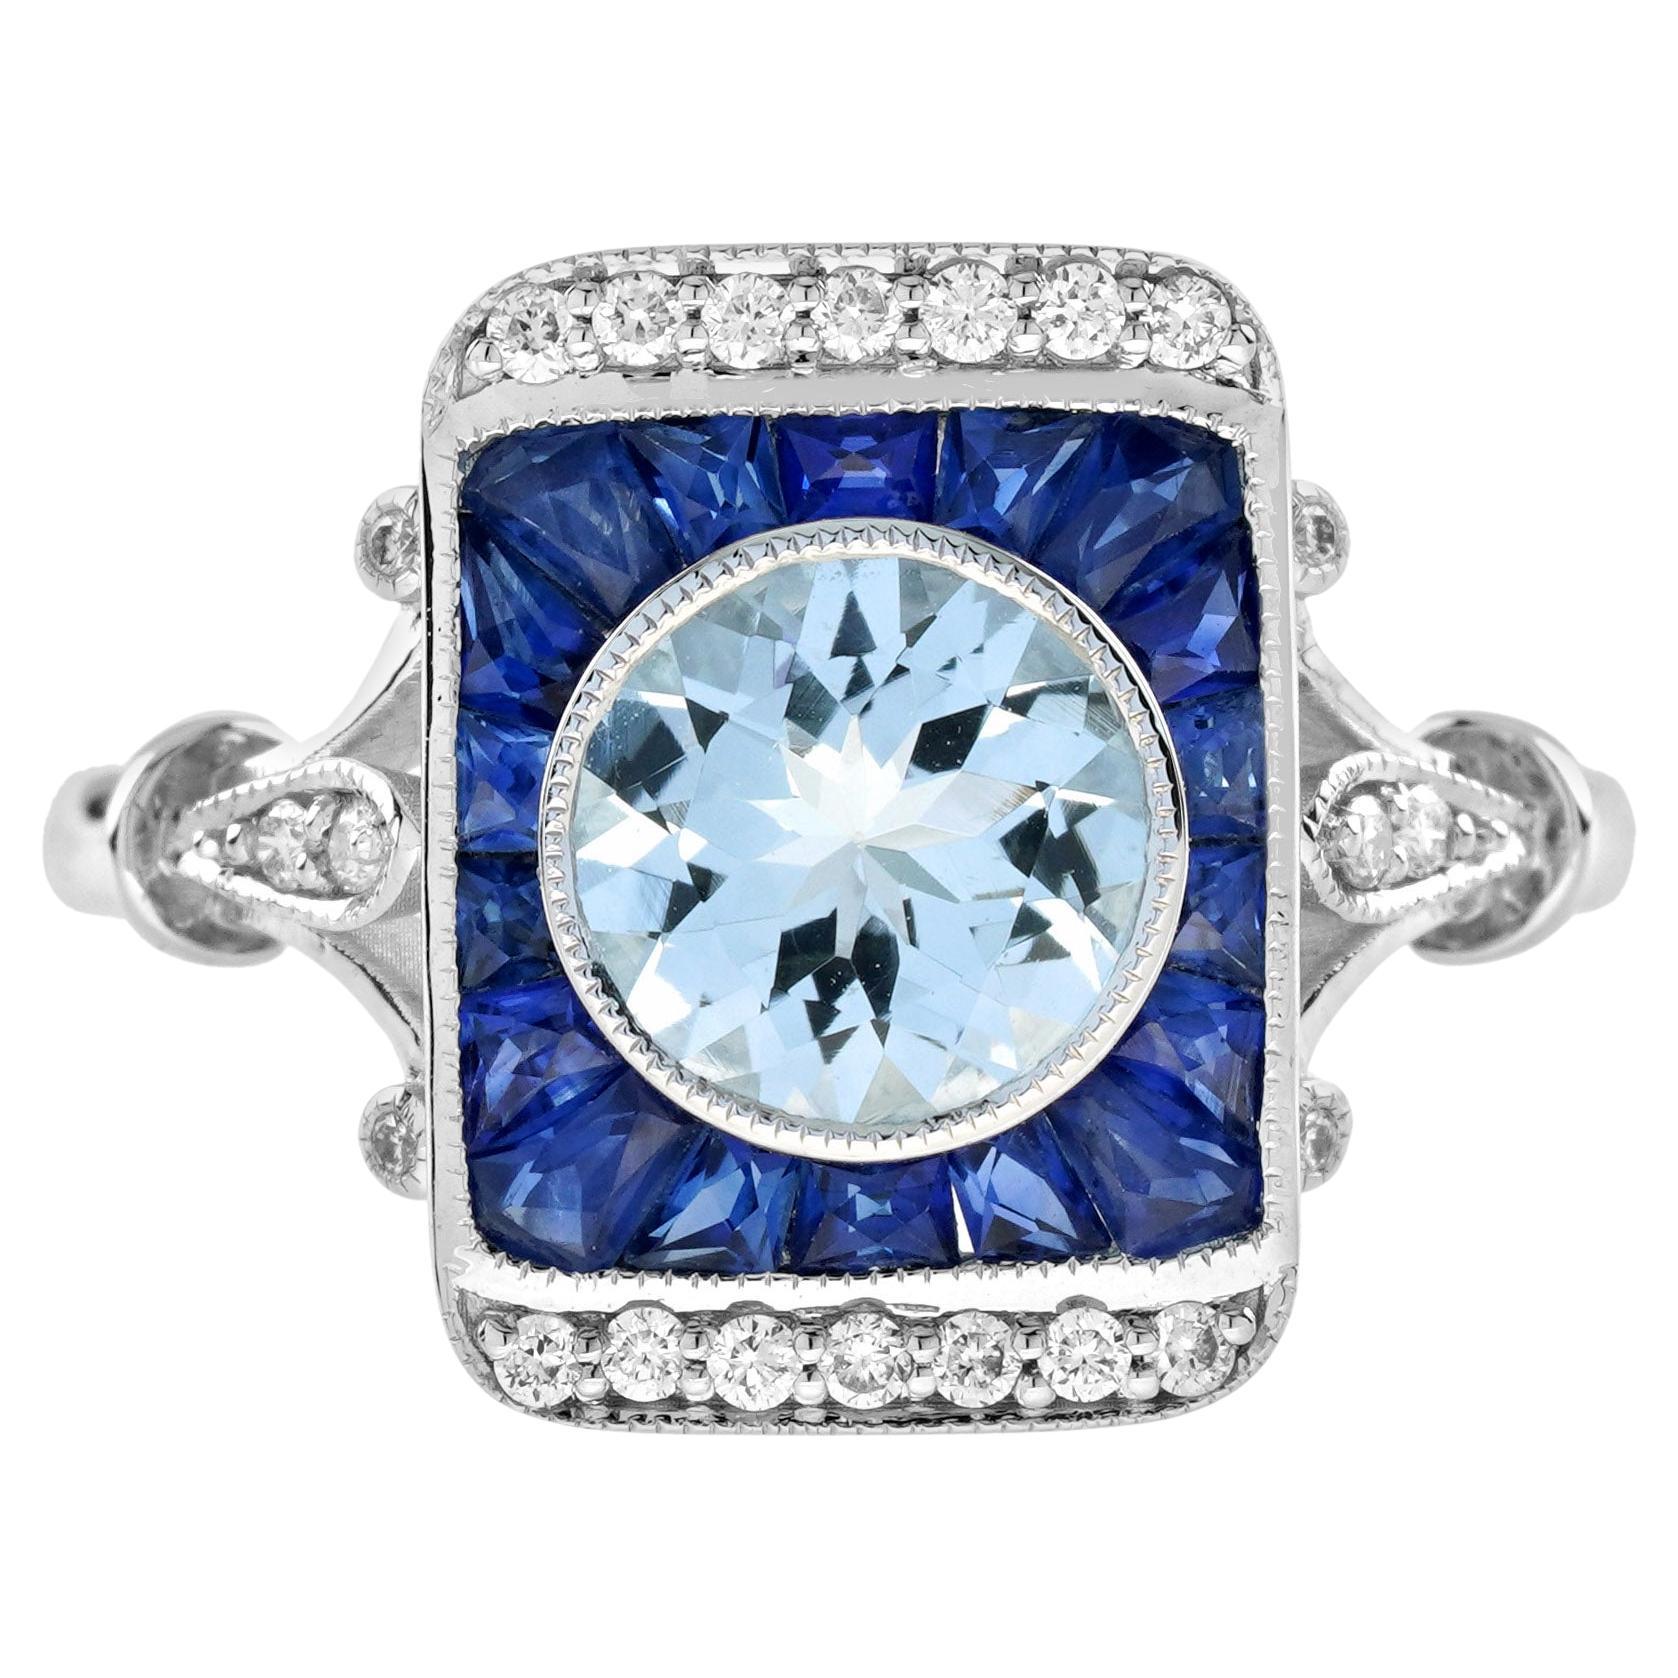 1.55 Ct. Aquamarine Blue Sapphire Diamond Engagement Ring in 18K White Gold For Sale